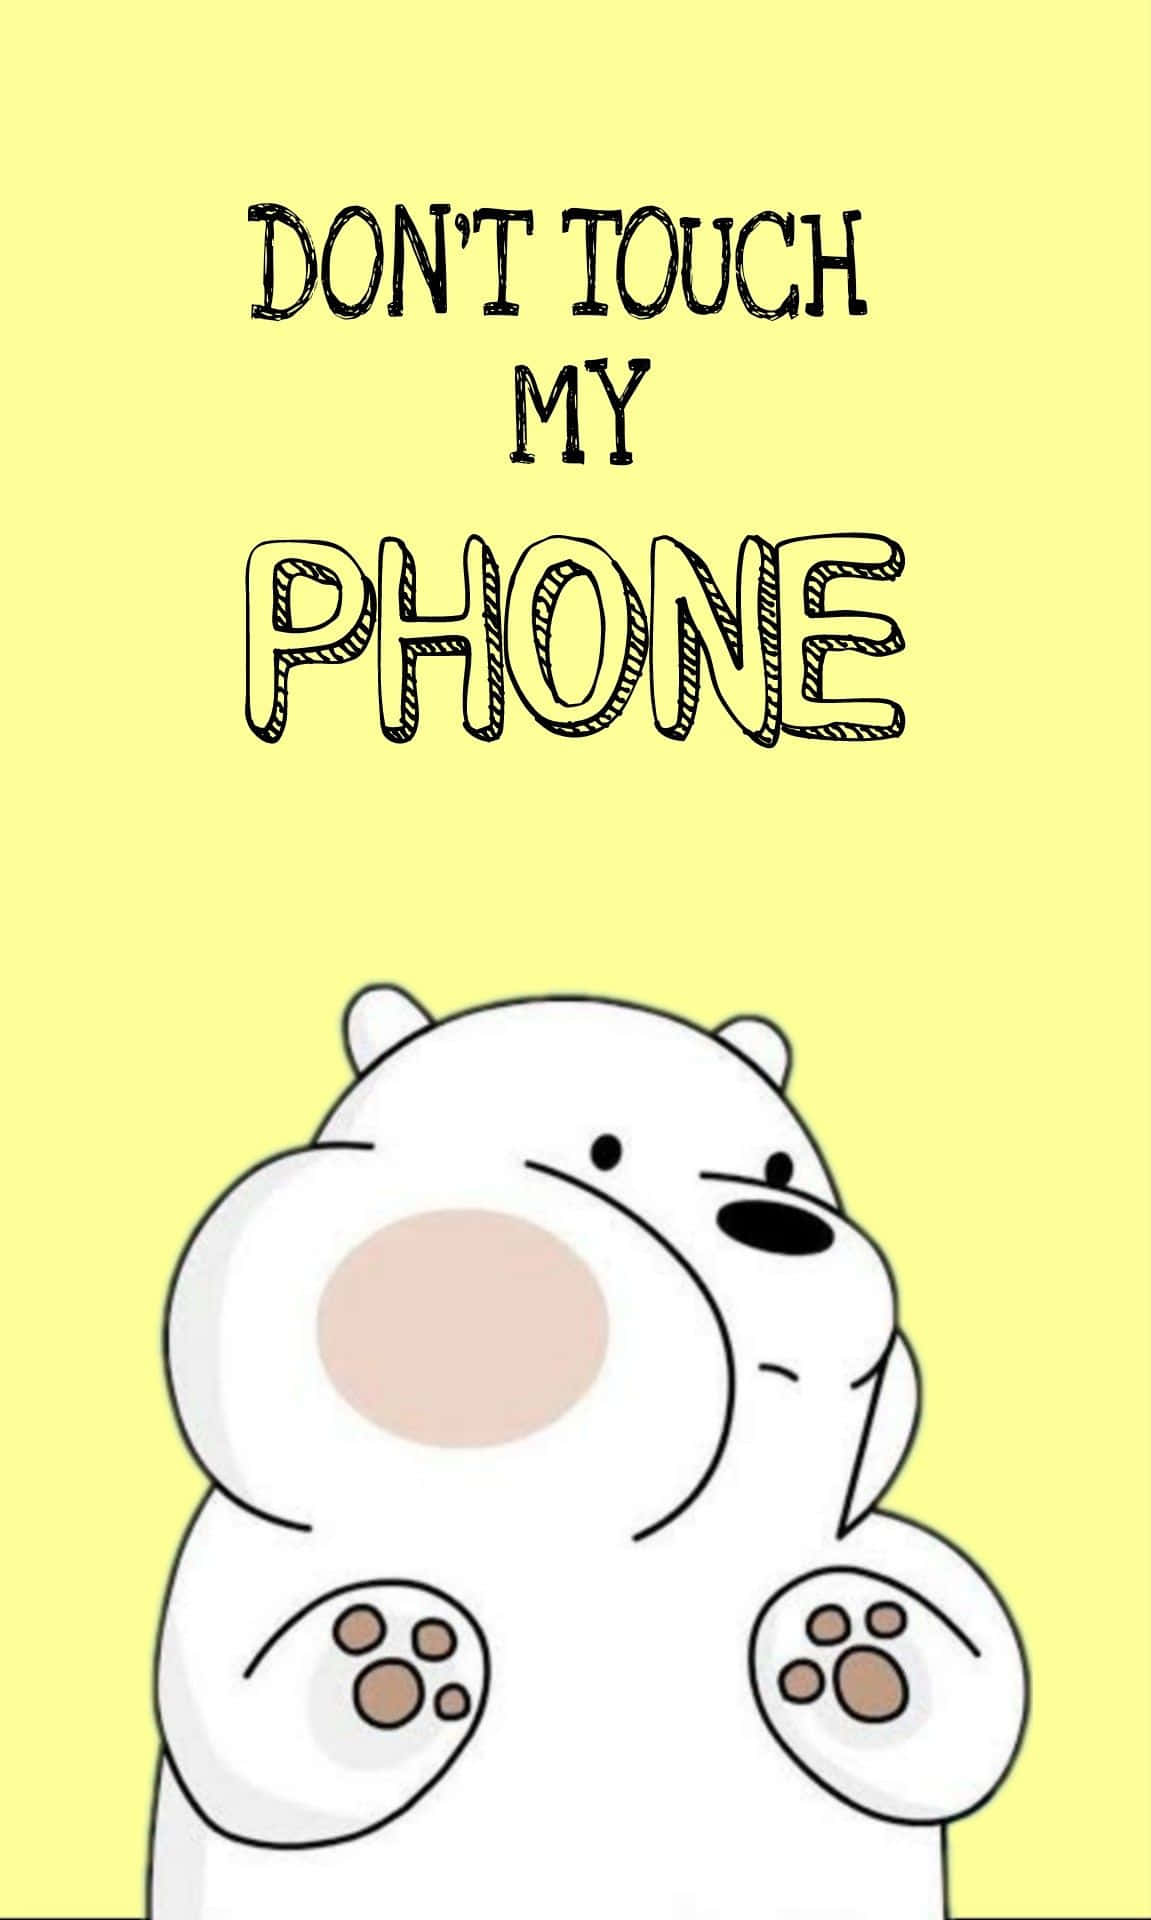 Why Are You On My Phone? Wallpaper